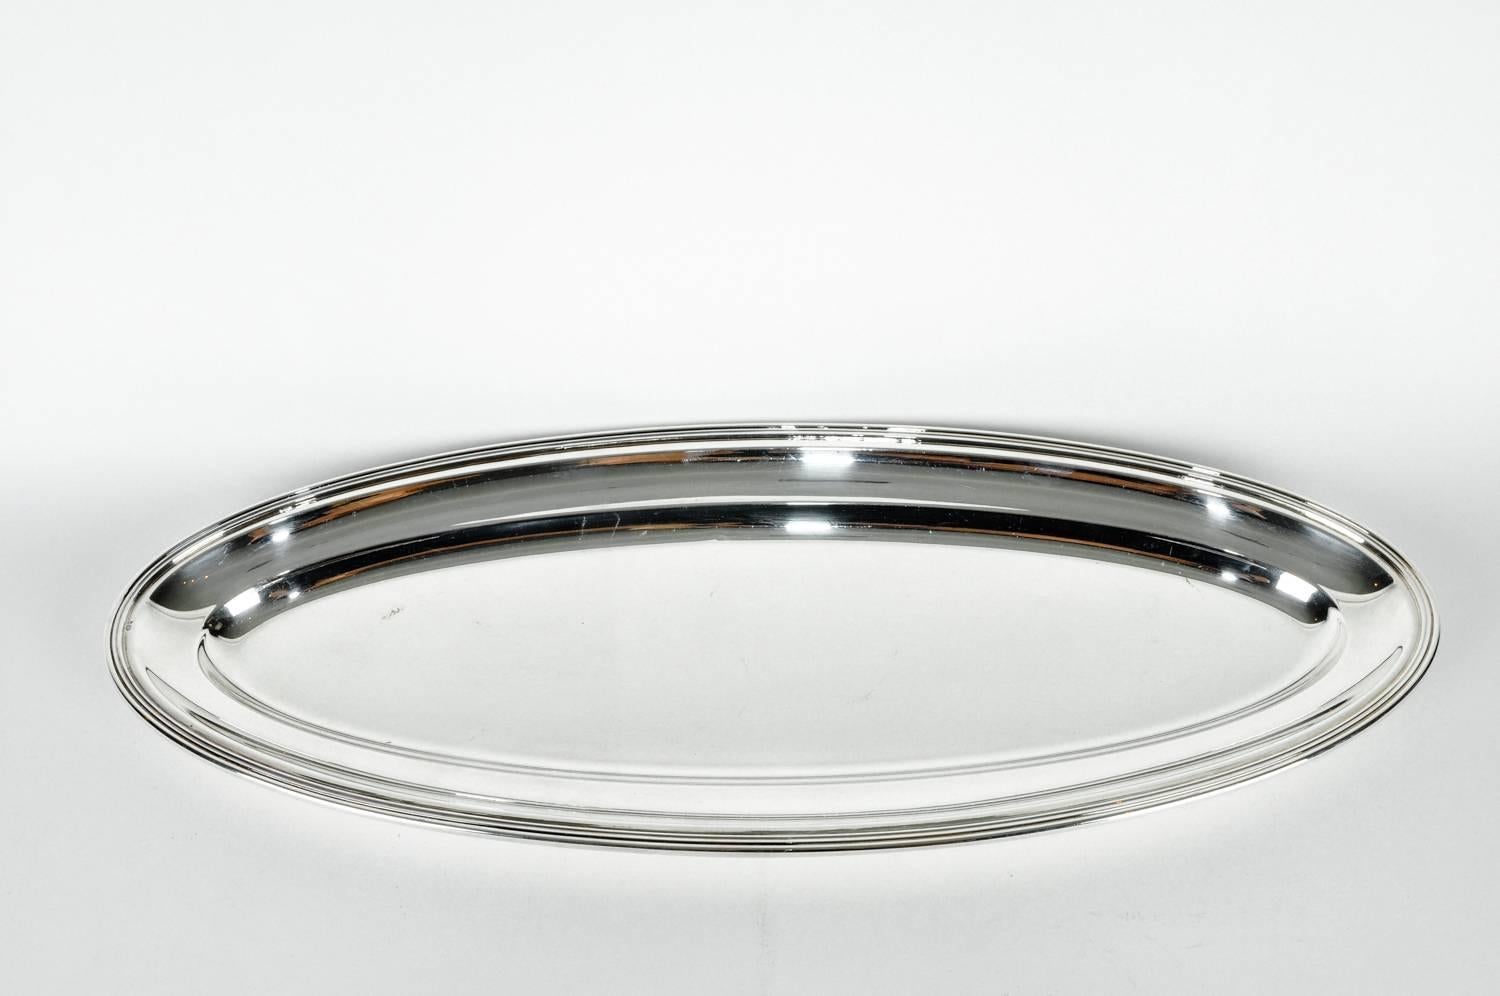 Vintage Oval Silver Plated Art Deco Style Barware or Serving Tray 1